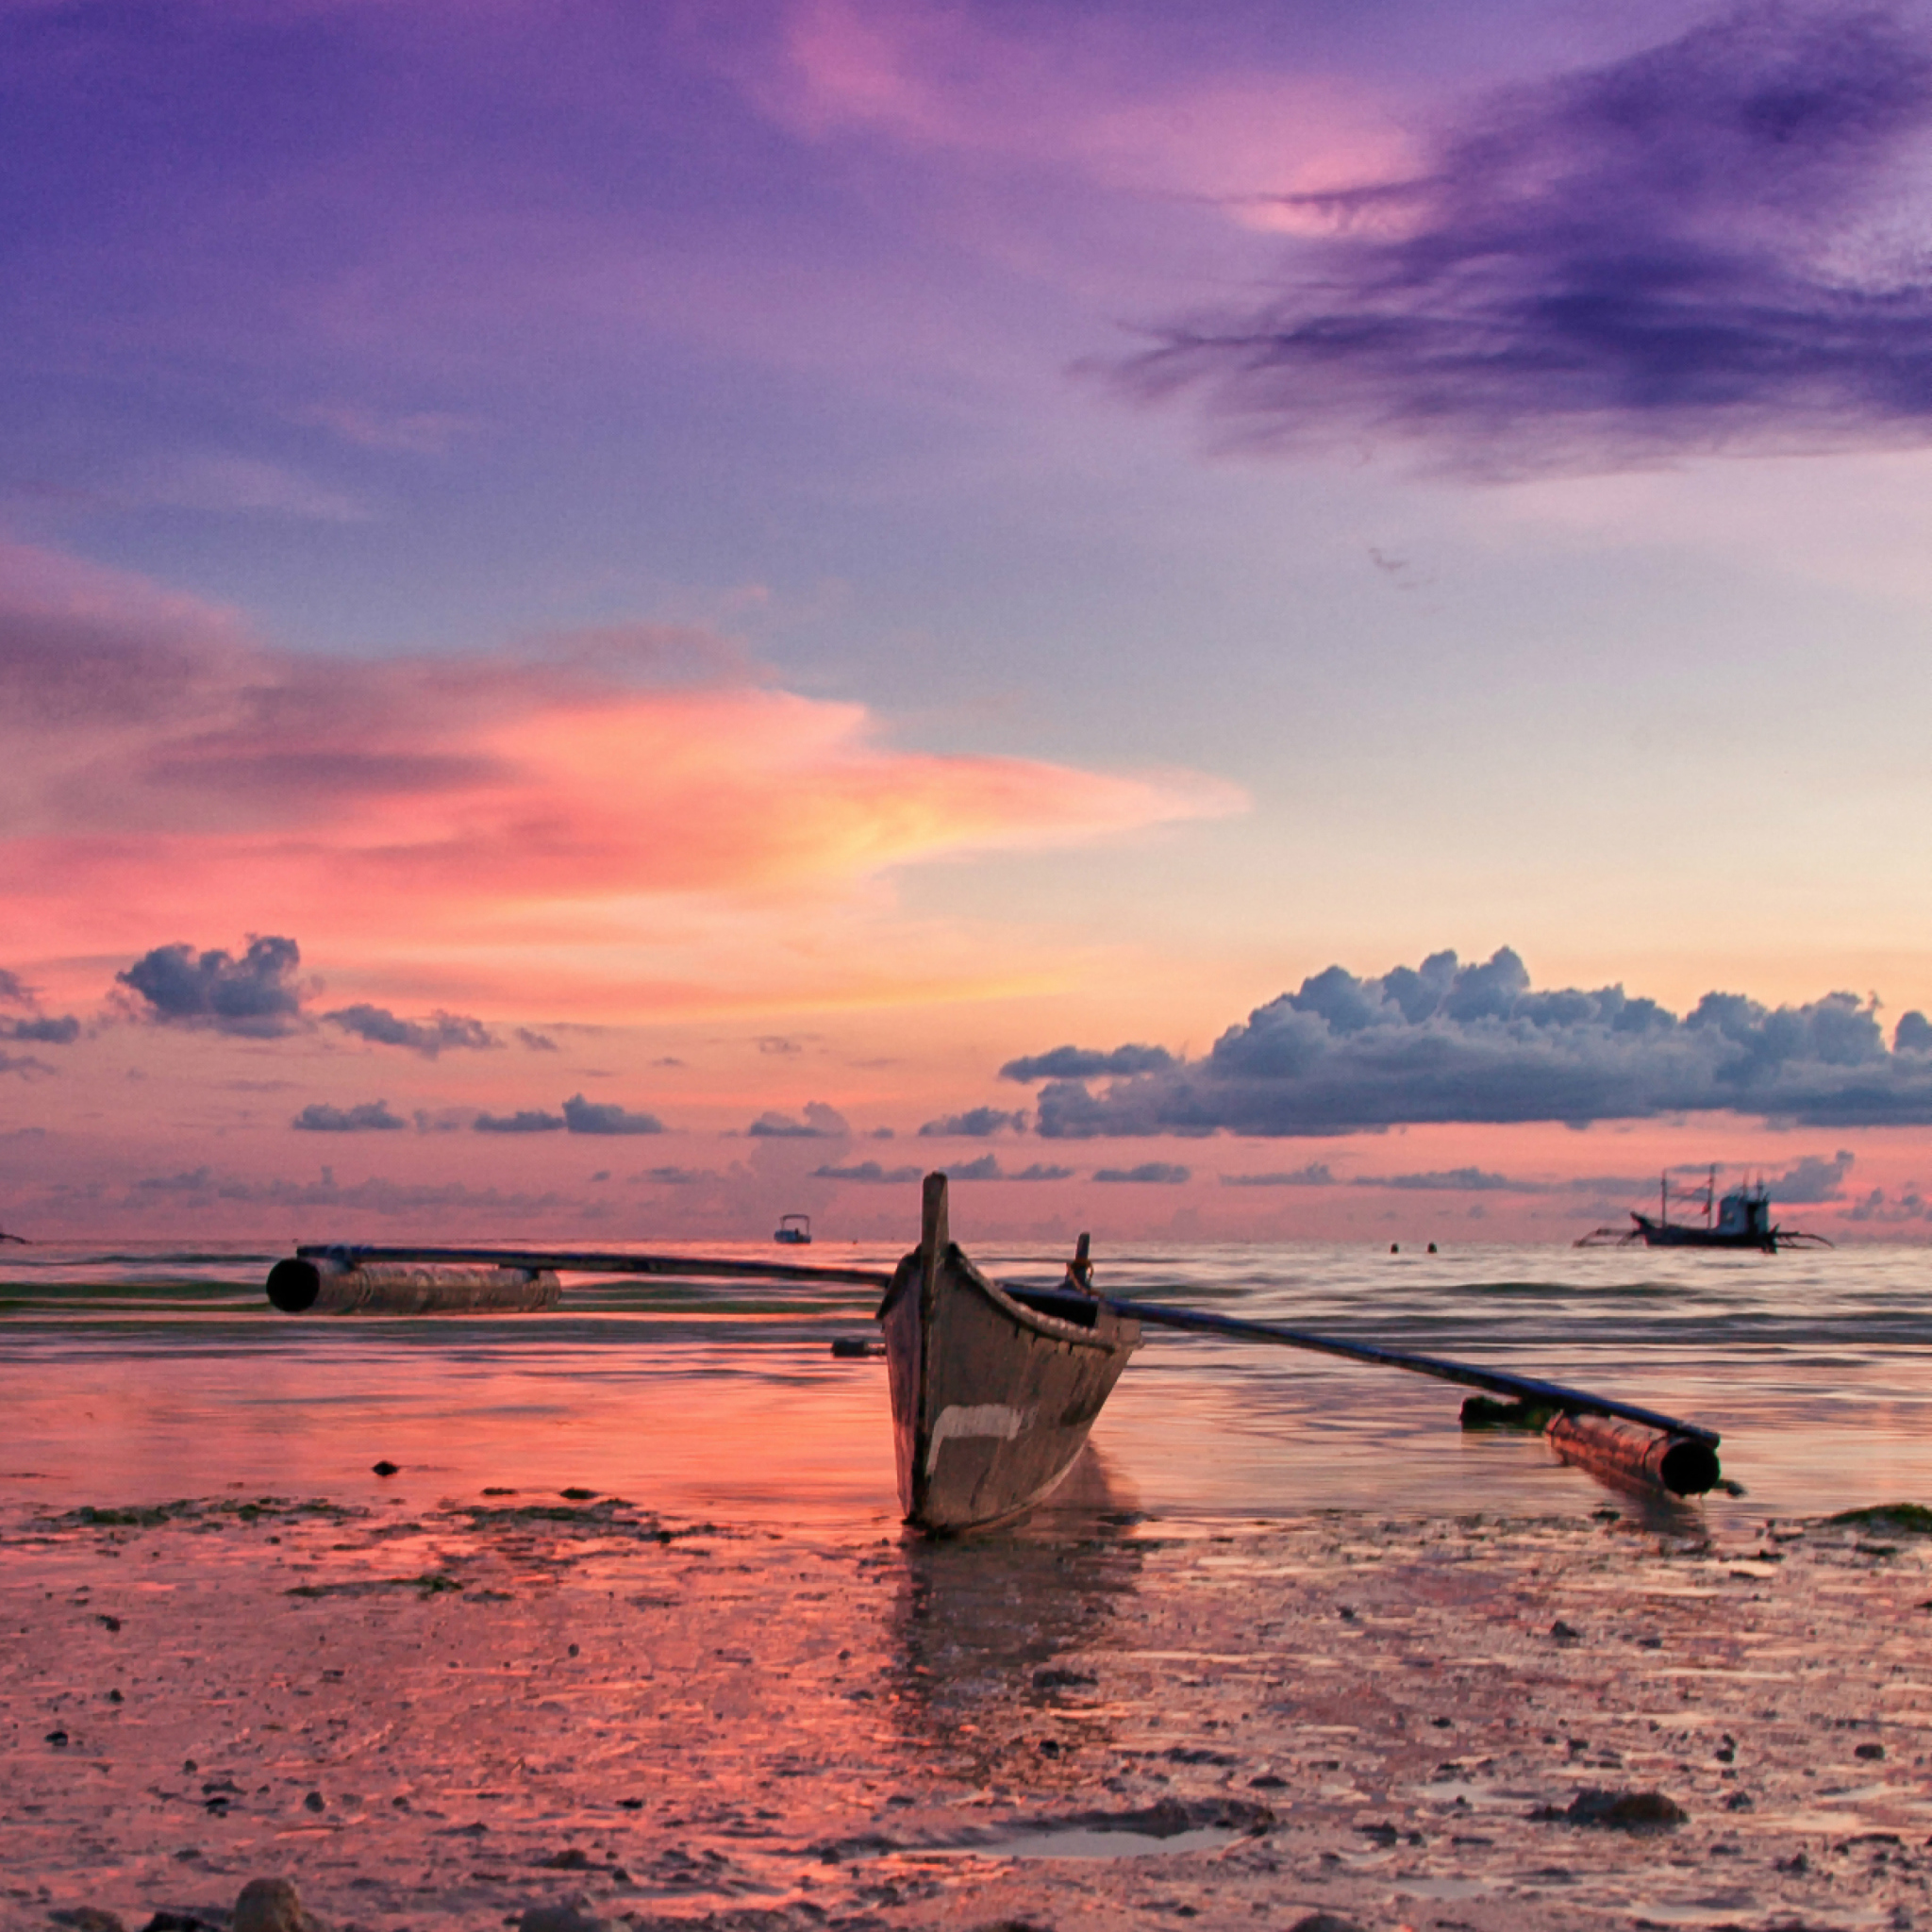 Sfondi Pink Sunset And Boat At Beach In Philippines 2048x2048